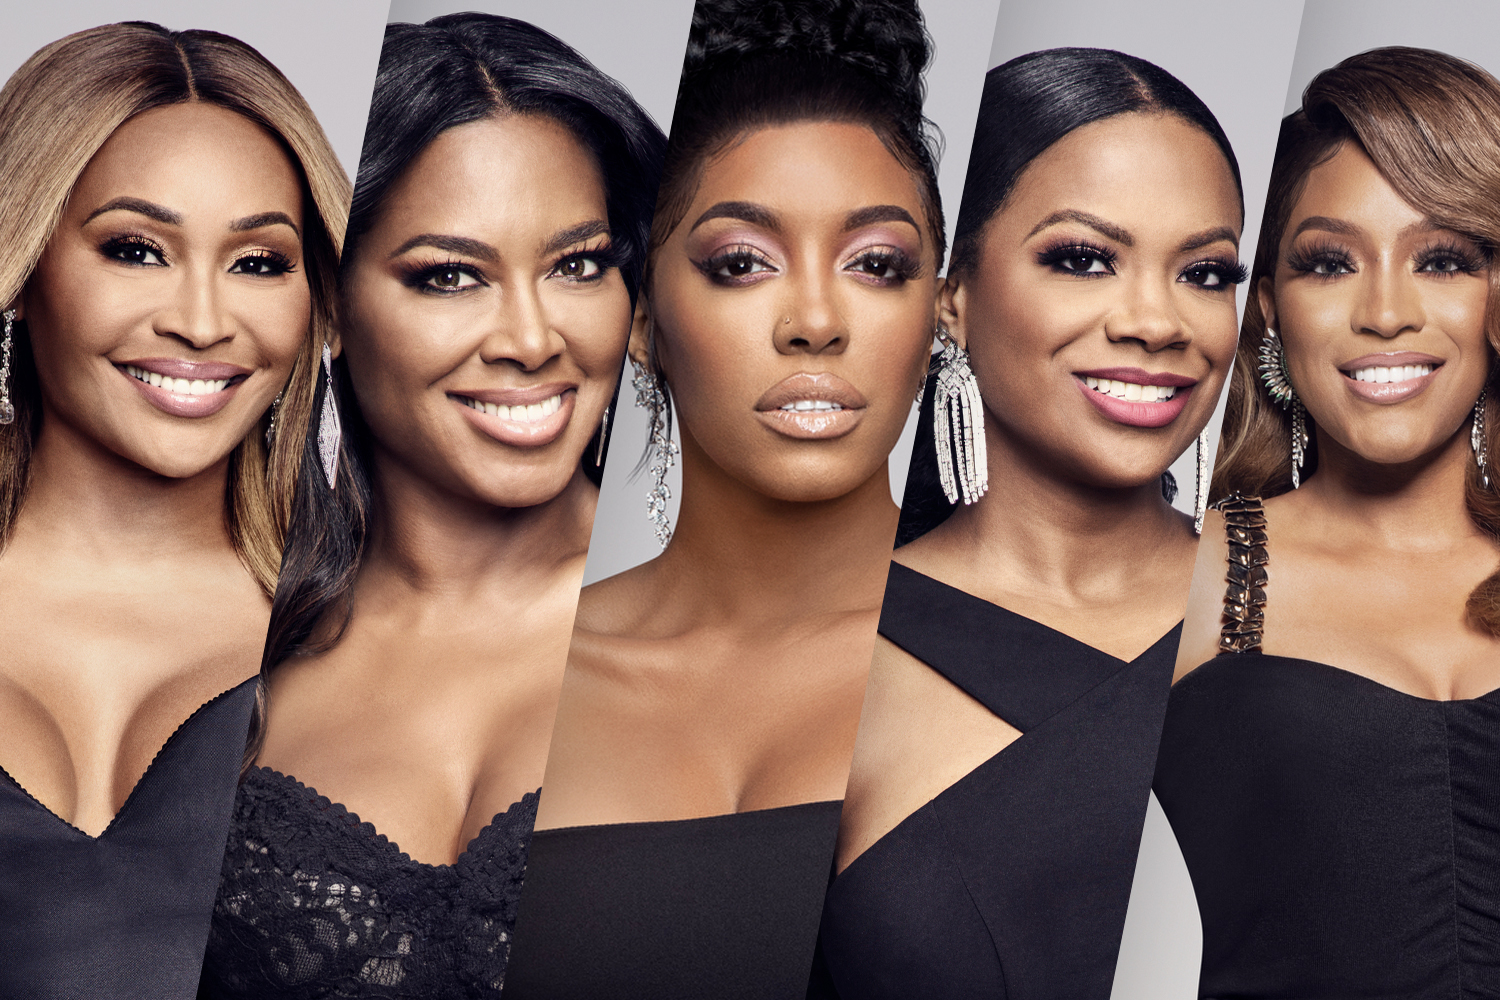 How Did ‘RHOA’ Season 13 End and What Did Epilogue Cards Say?